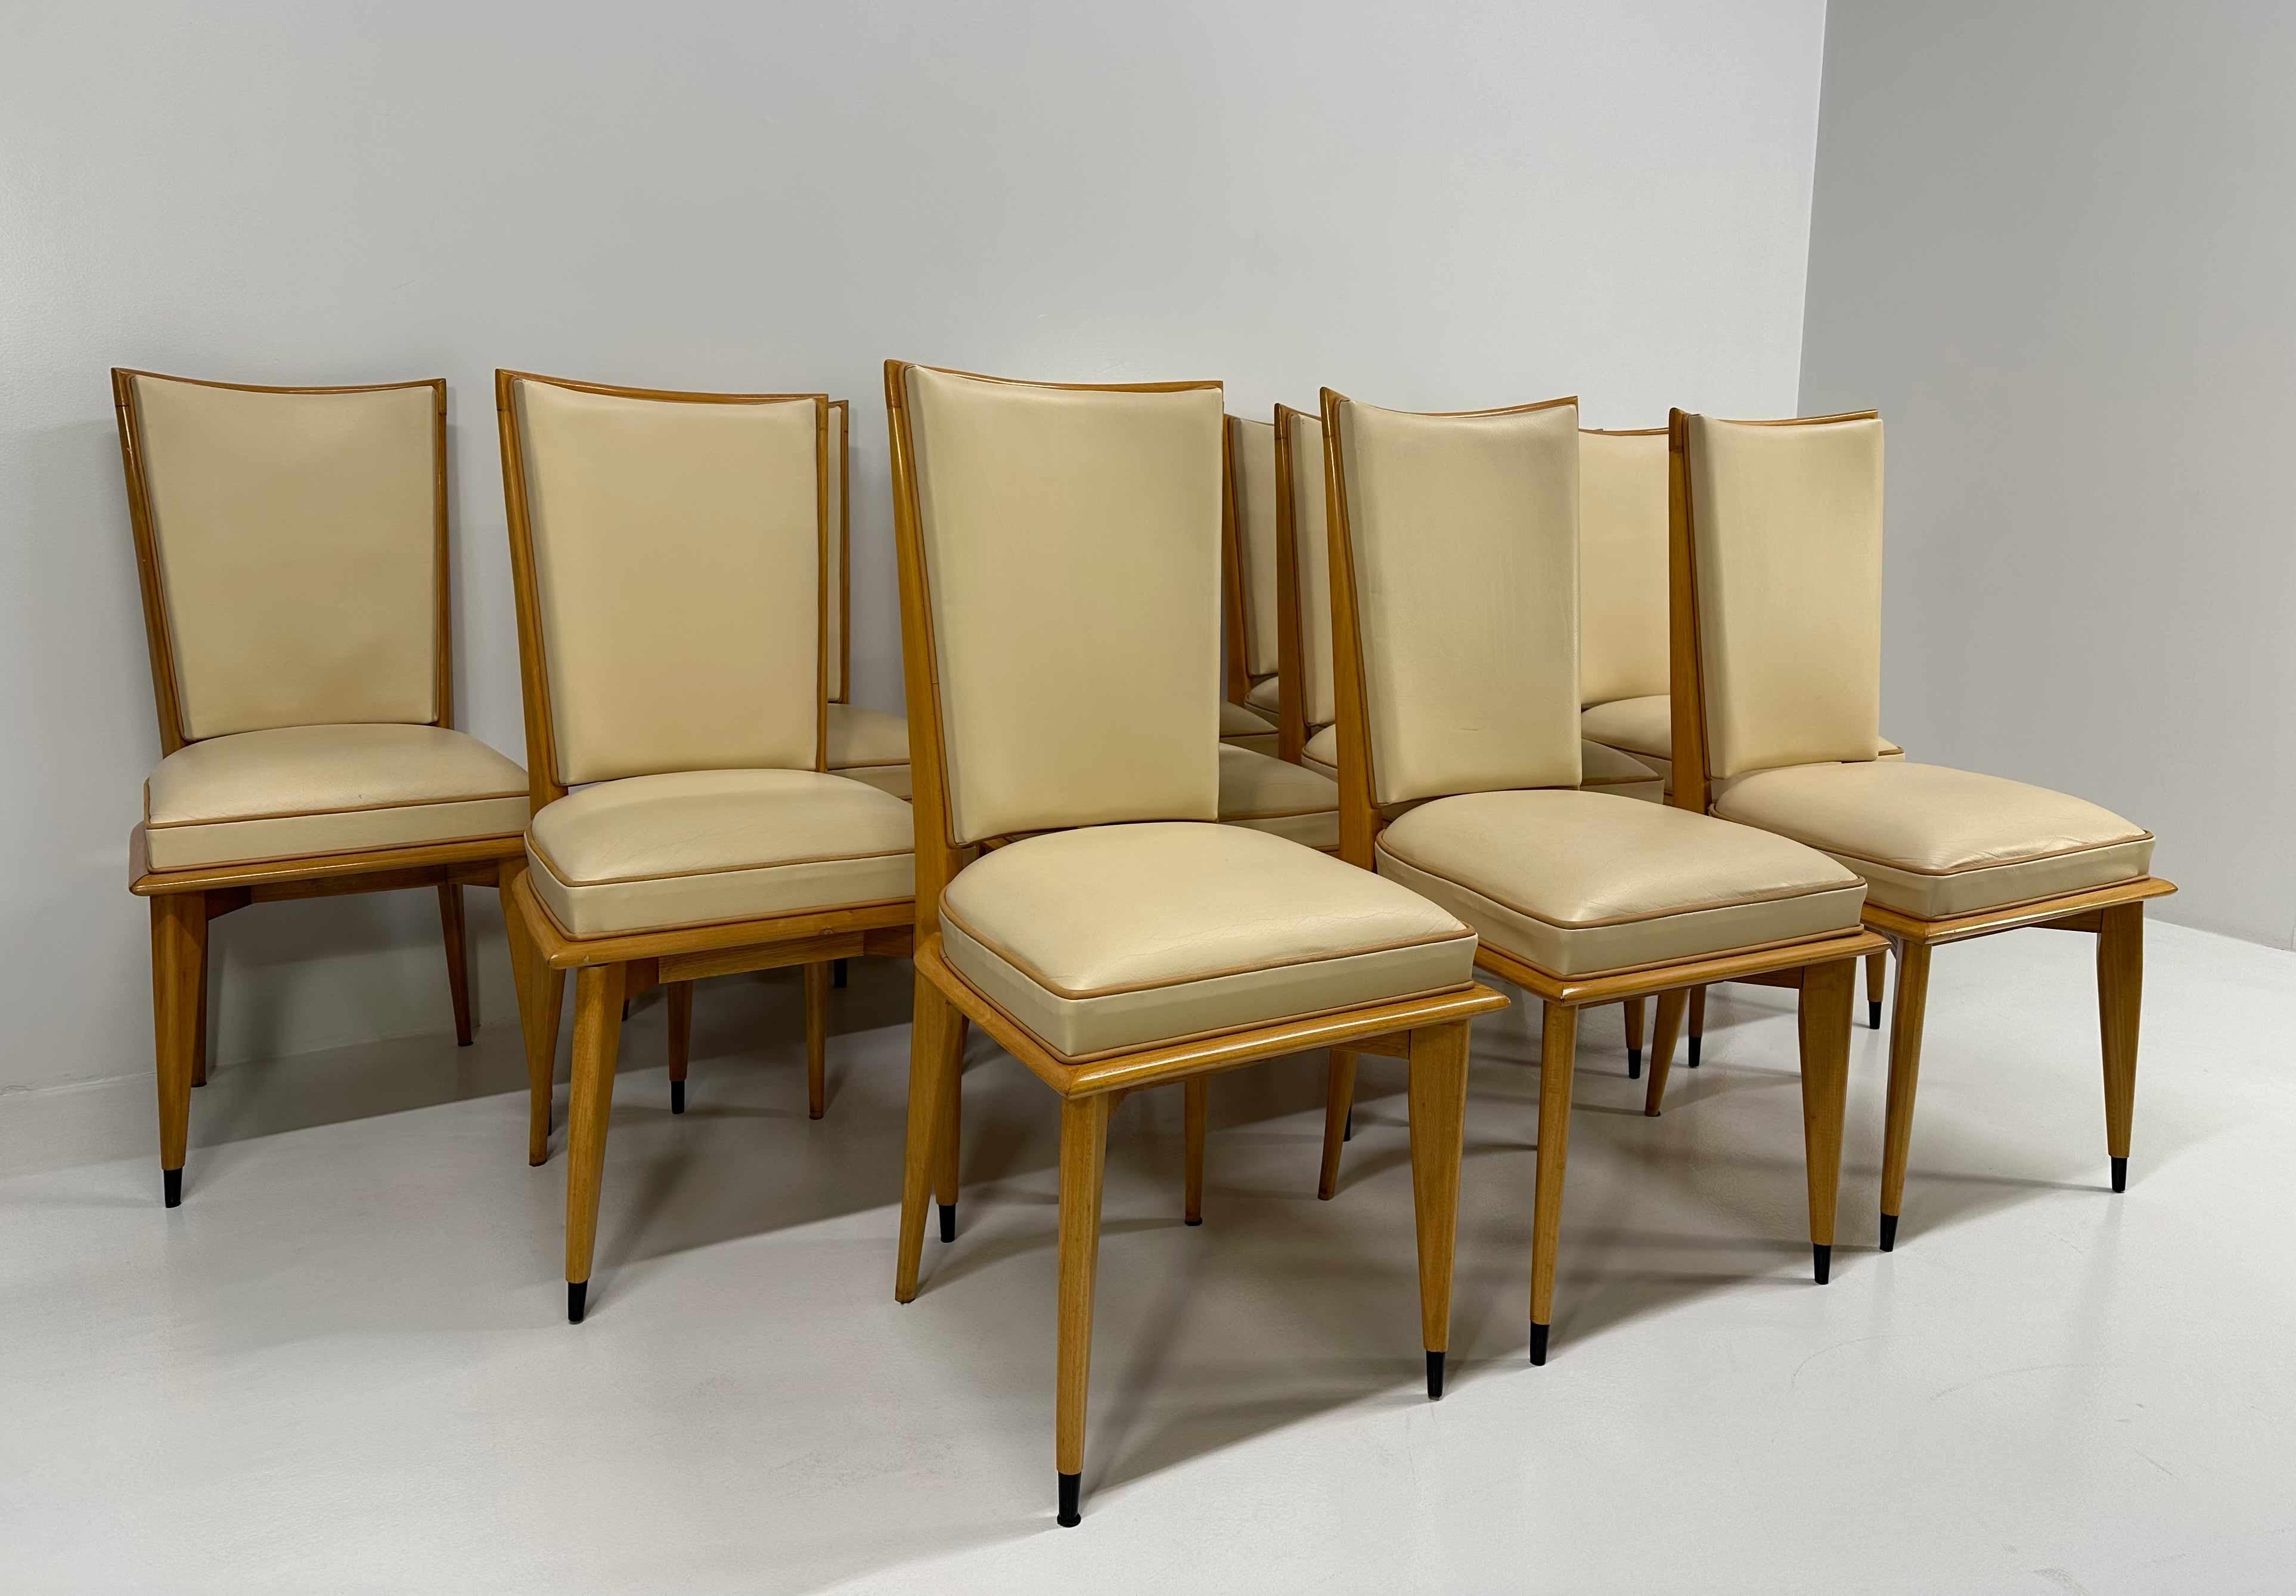 French Art Deco Set of 12 Chairs in Maple and Cream Leather, 1930s In Good Condition For Sale In Meda, MB